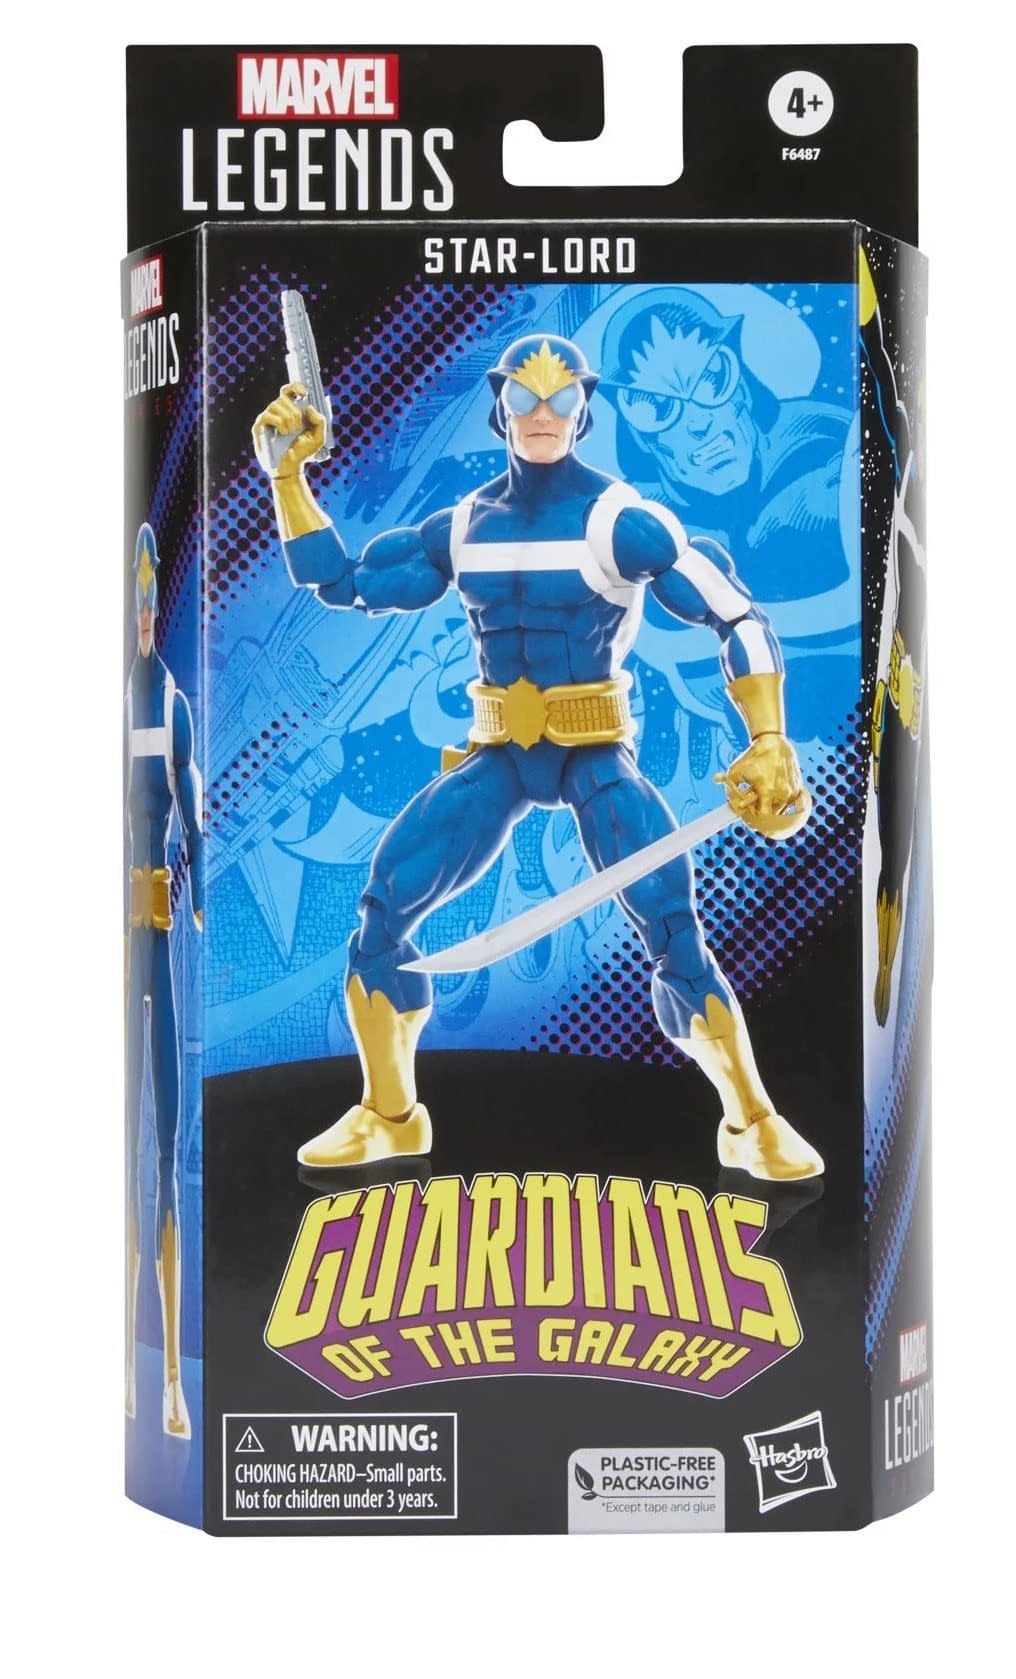 Marvel Legends New Window-less Packaging is Growing on Me